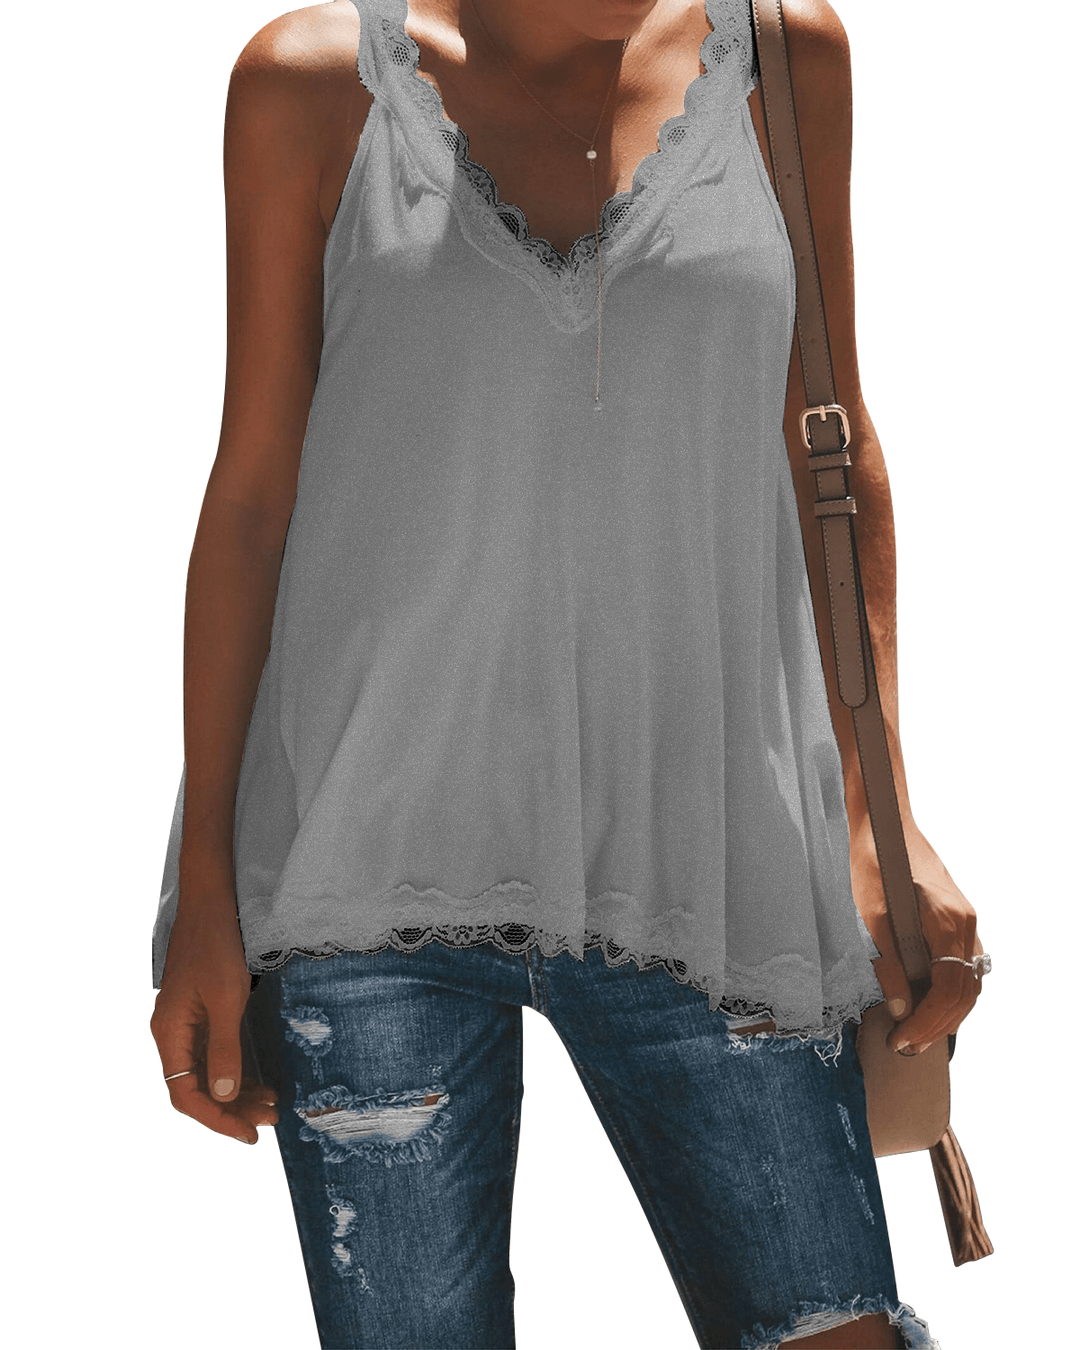 Casual Summer V-Neck Lace Patchwork Sleeveless Tank Top - MRSLM